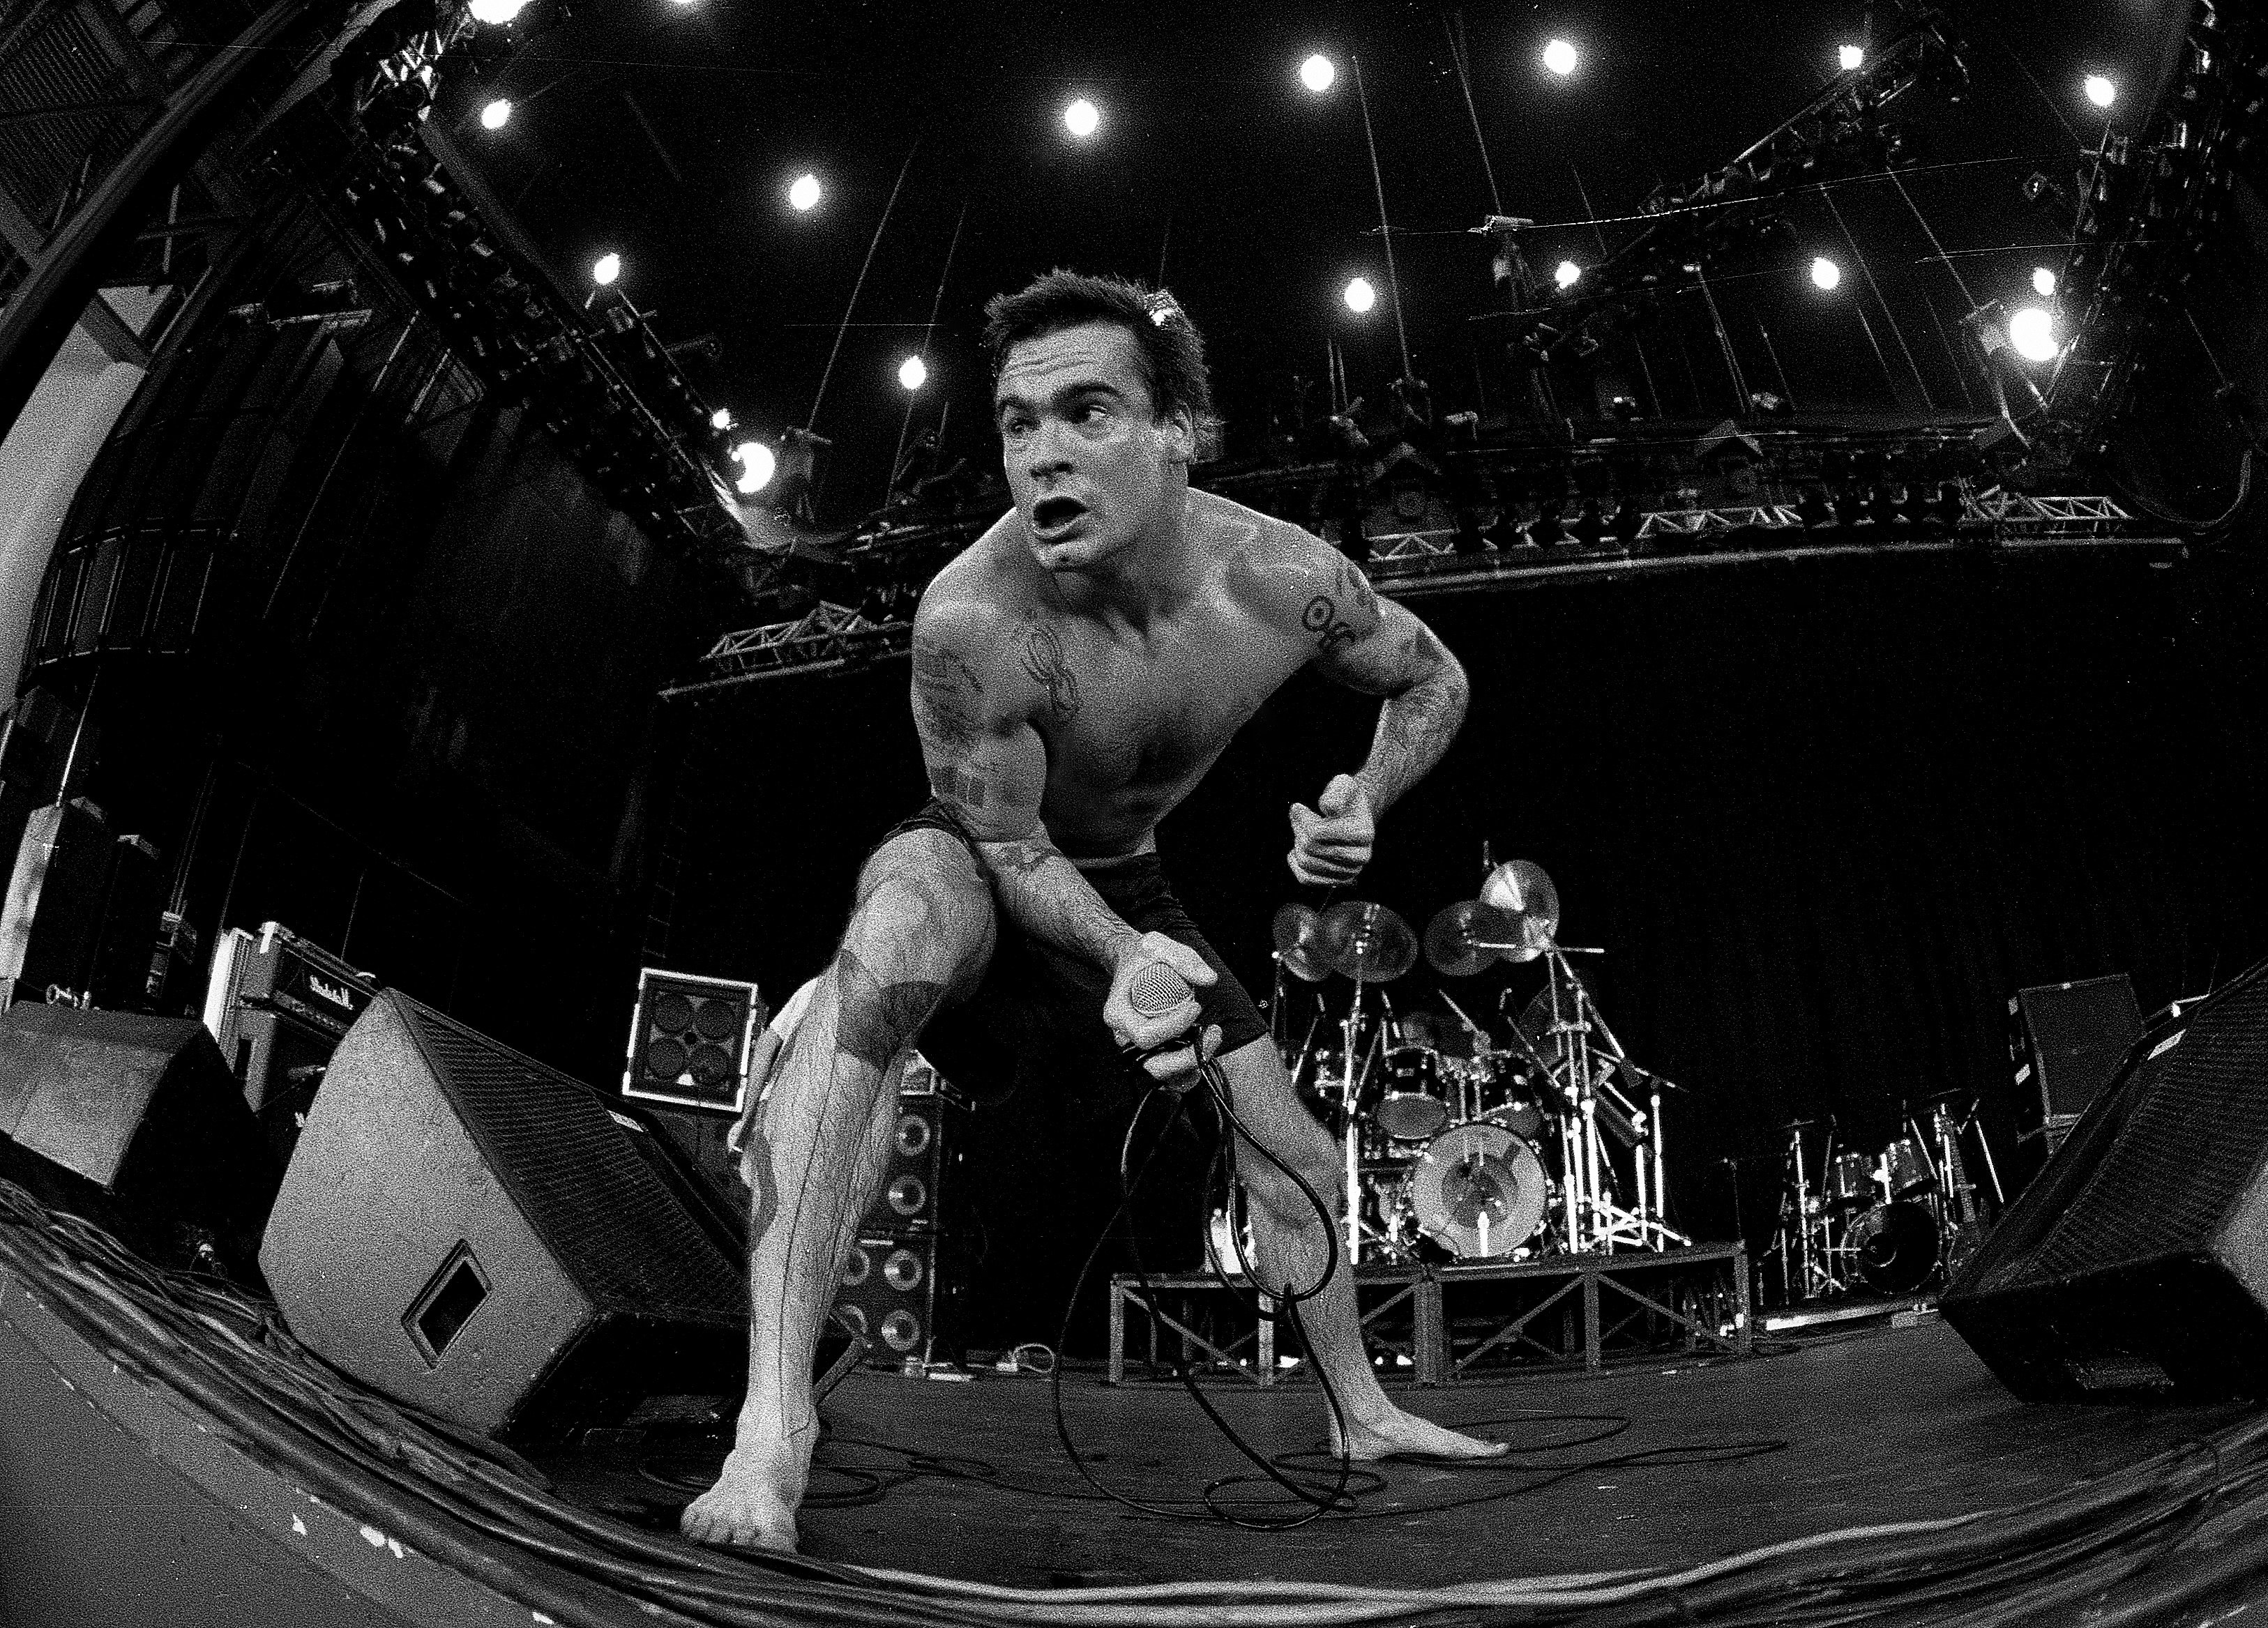 Japanese, motivation and being Henry Rollins.